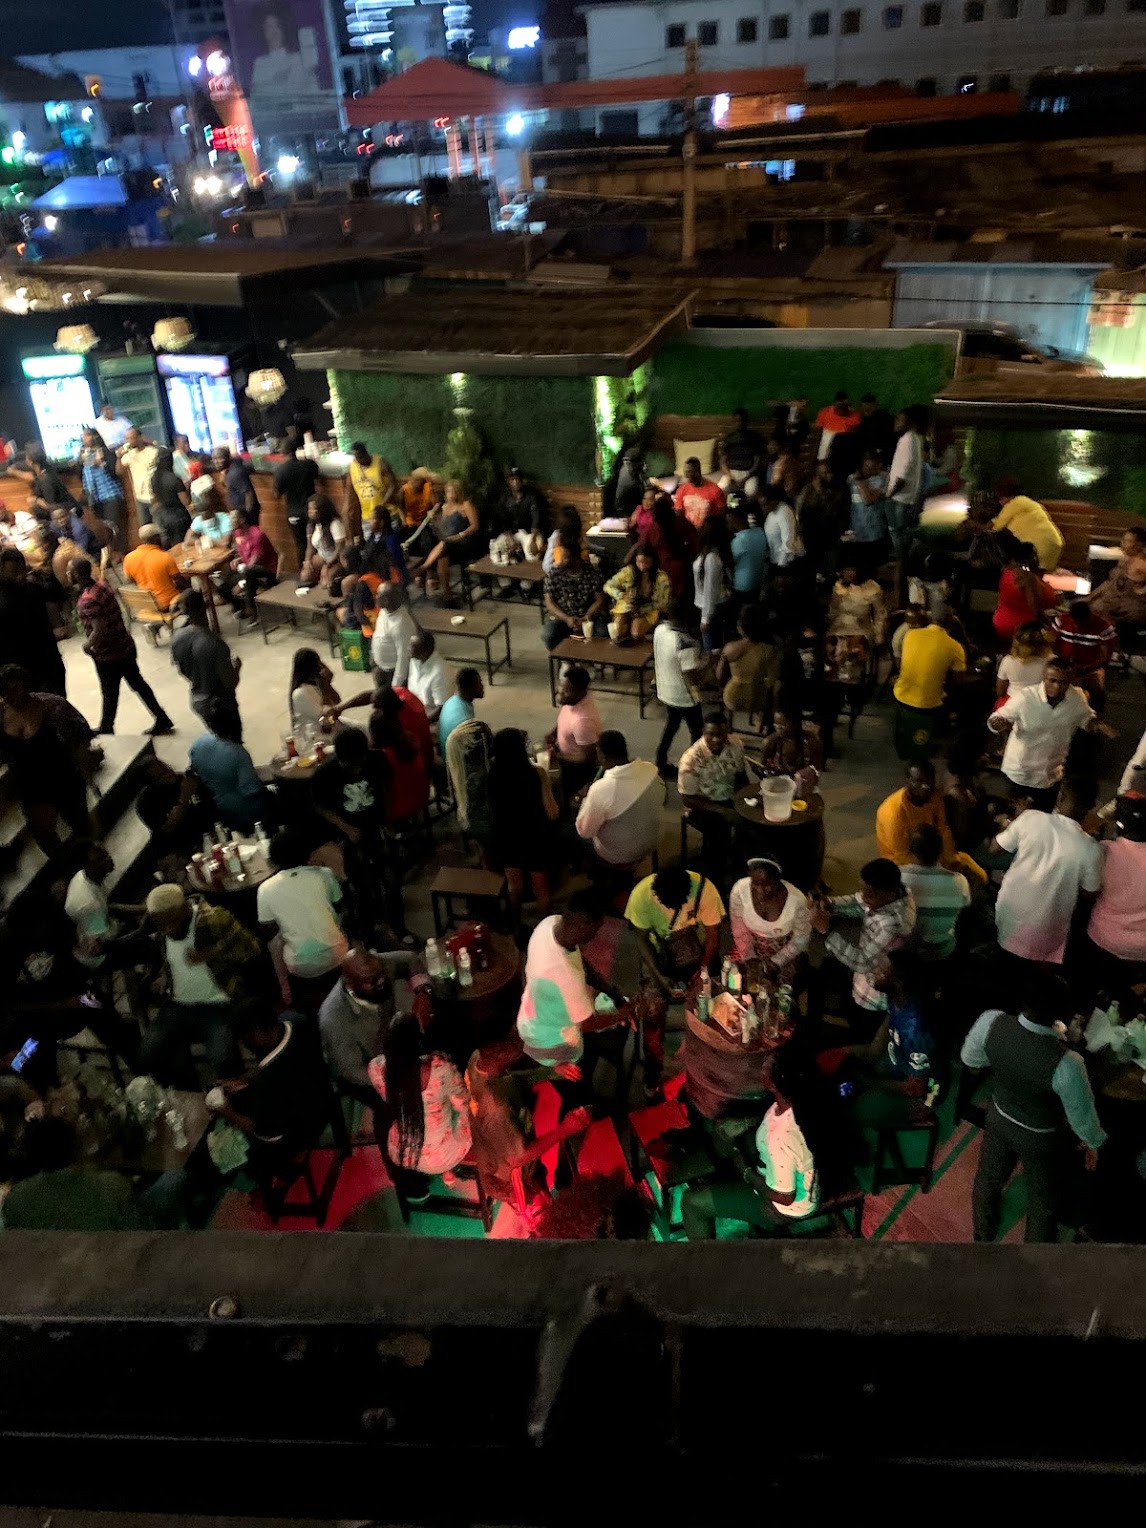 An upstairs view of the nightlife crowd at Kona, a nightlife venue in Accra, Ghana.